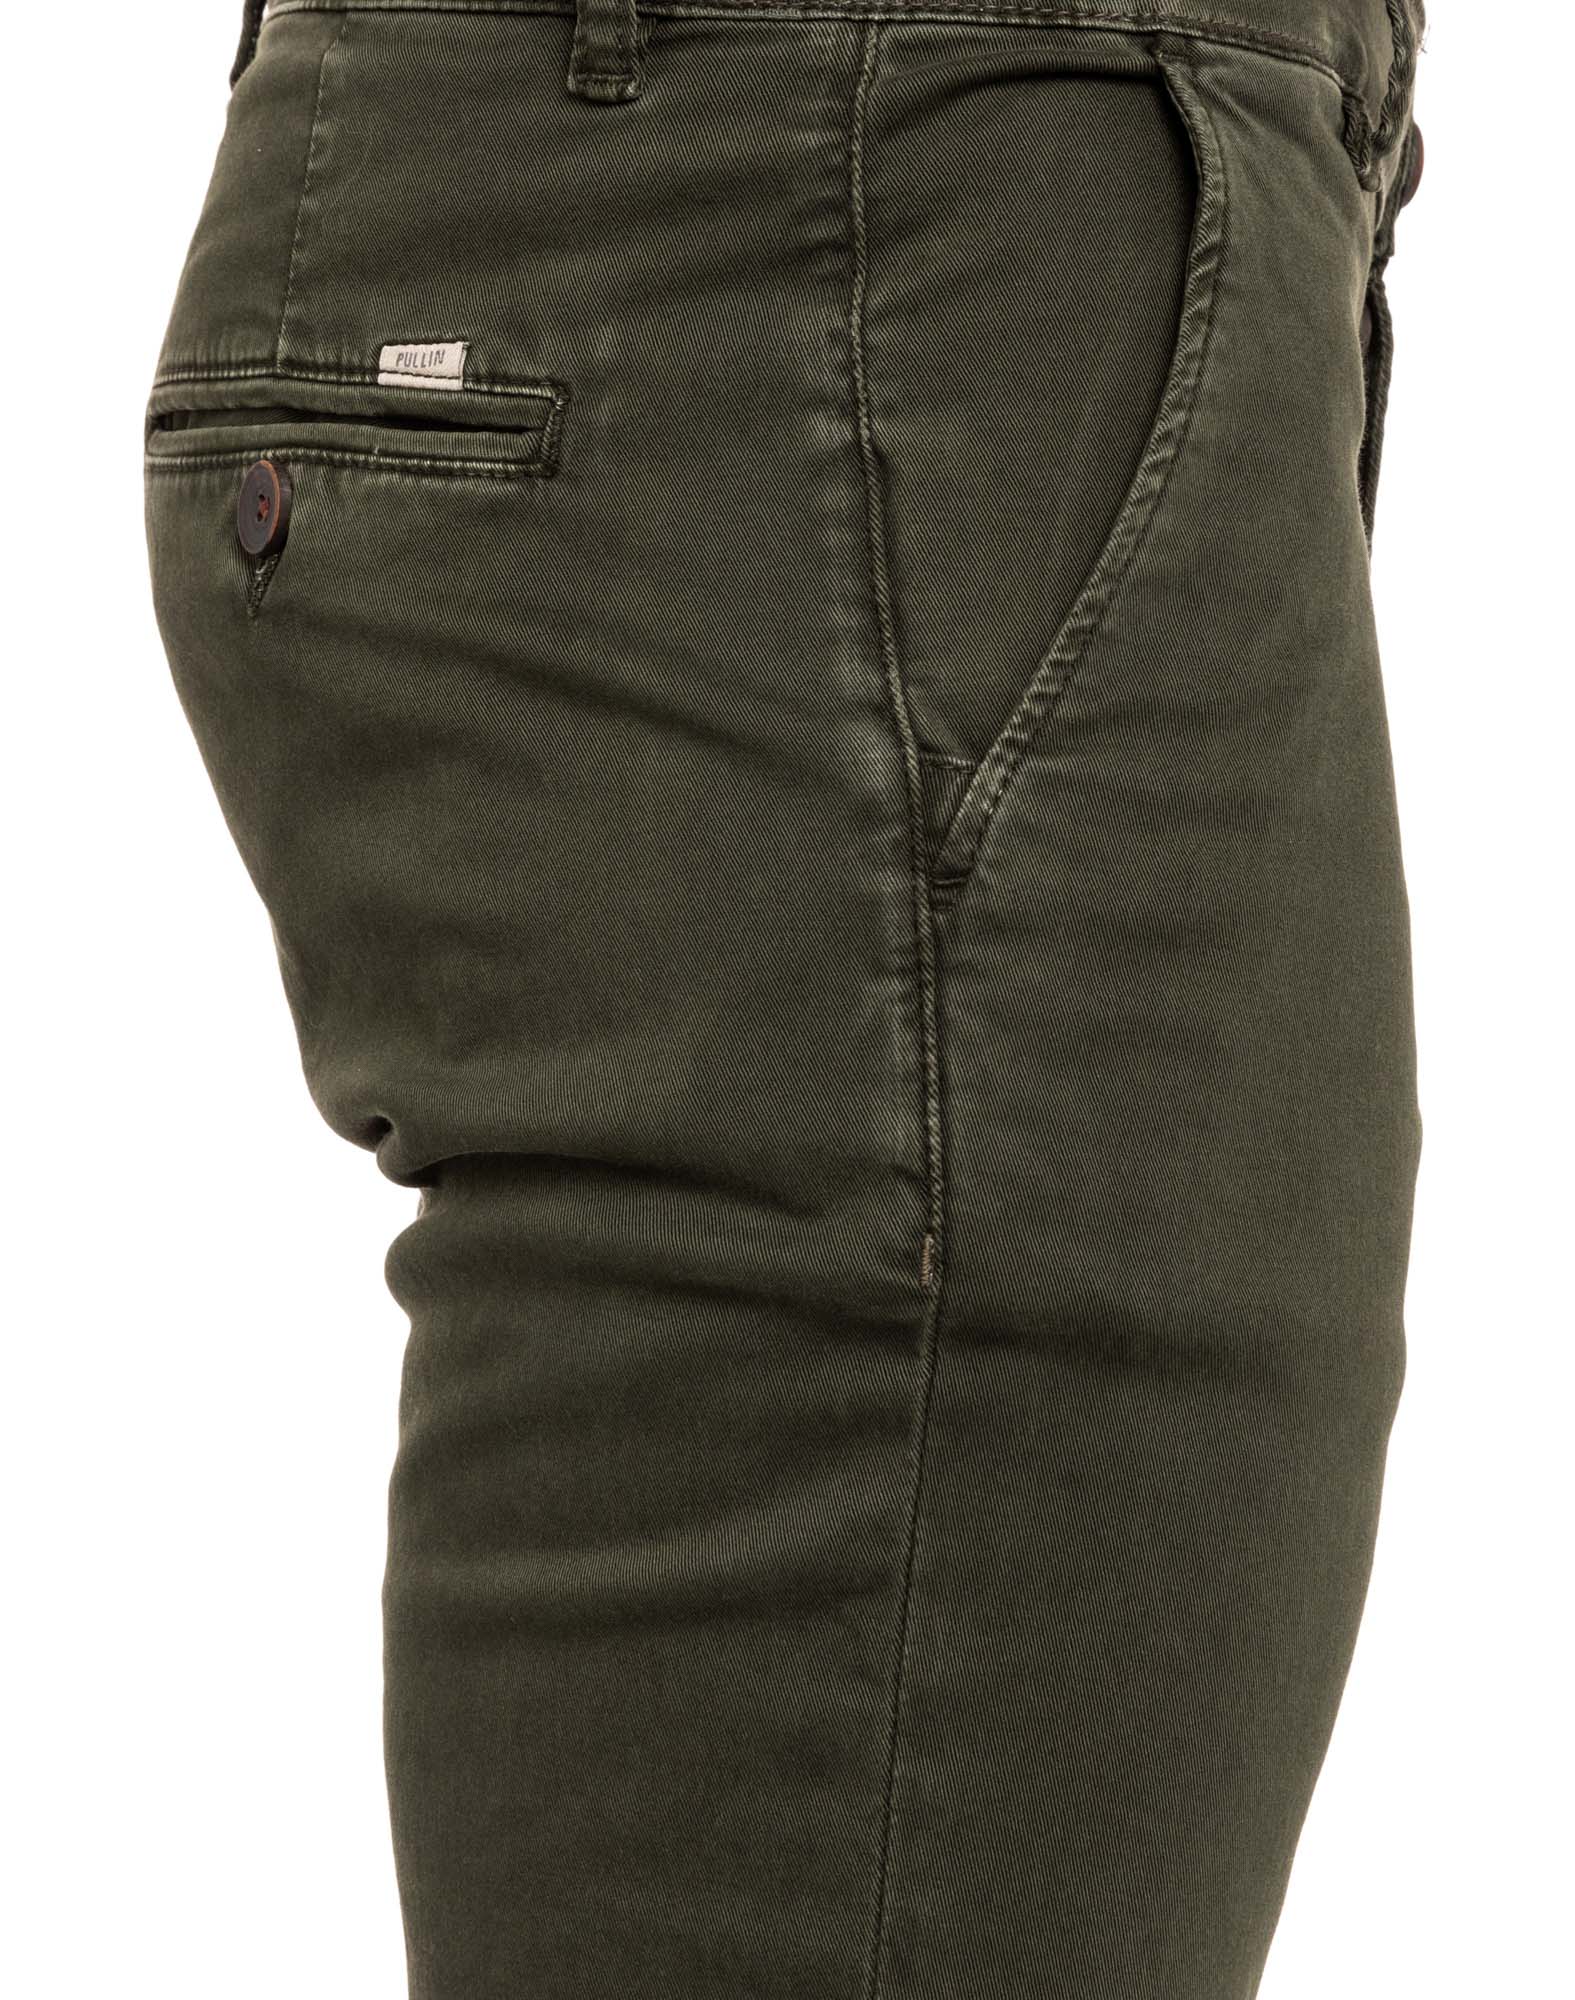 Men's pants chino cut FOREST